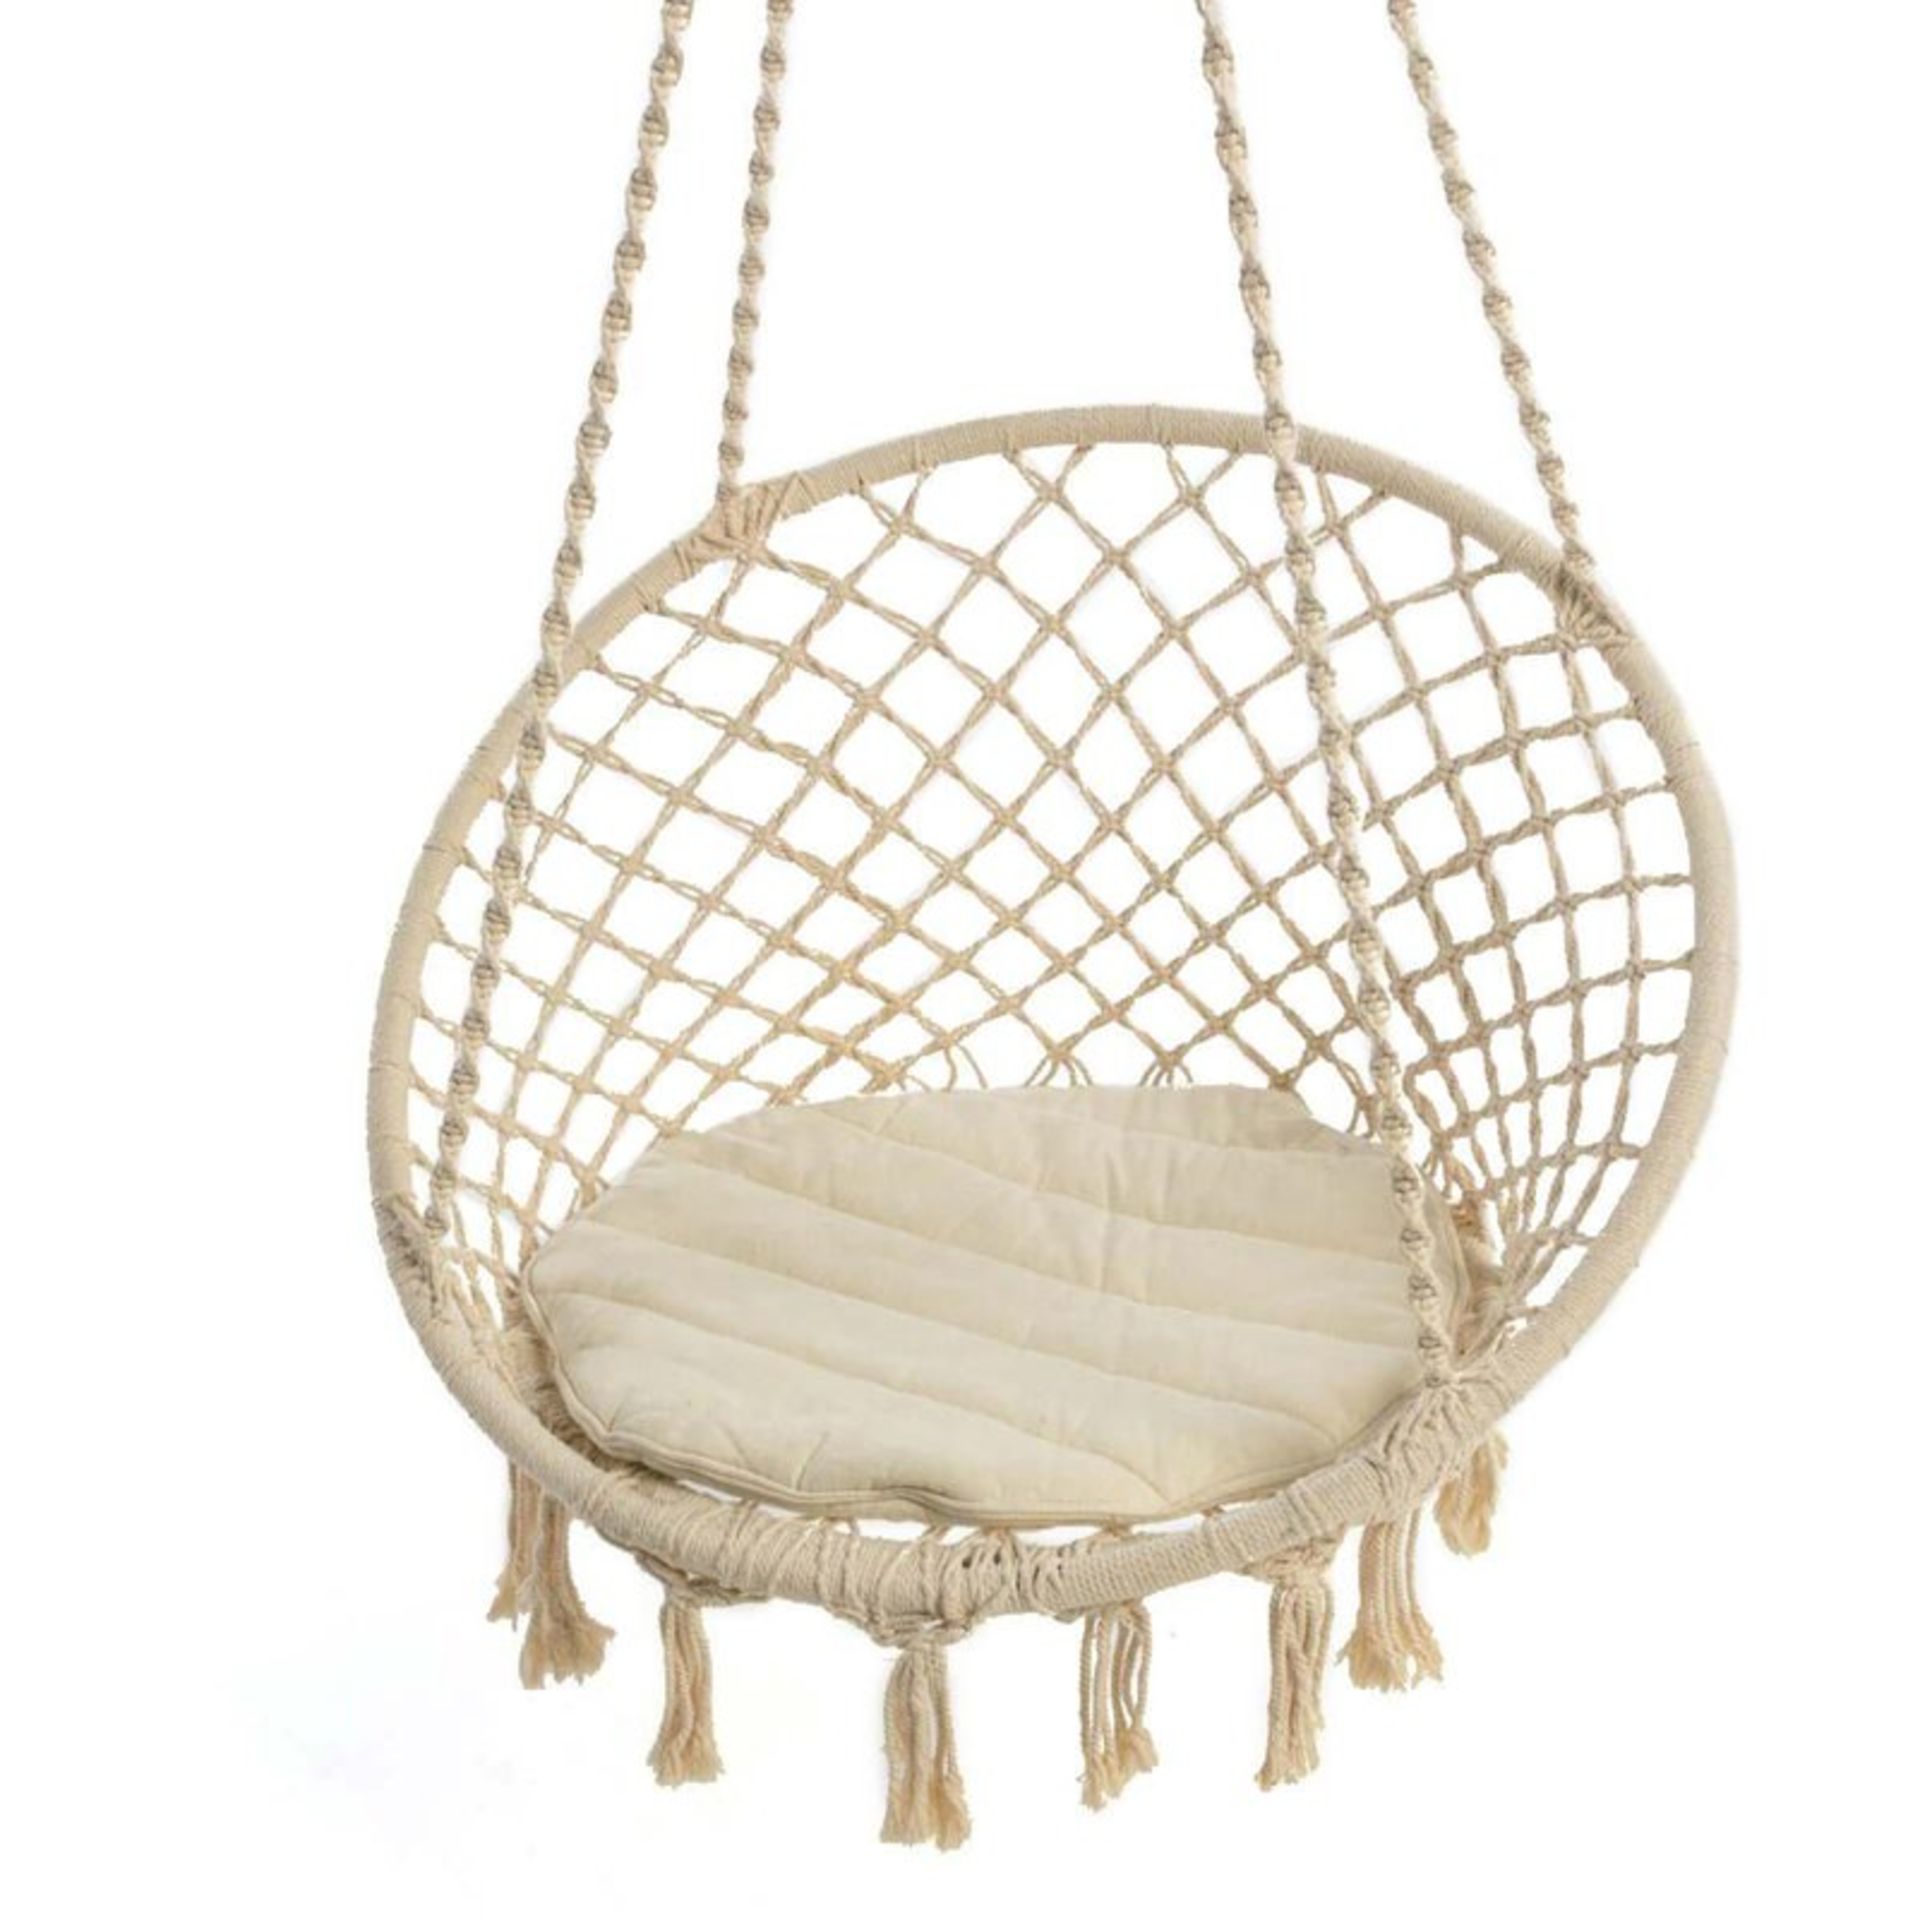 Parkmont Hanging Chair - £97.74 - Image 3 of 3